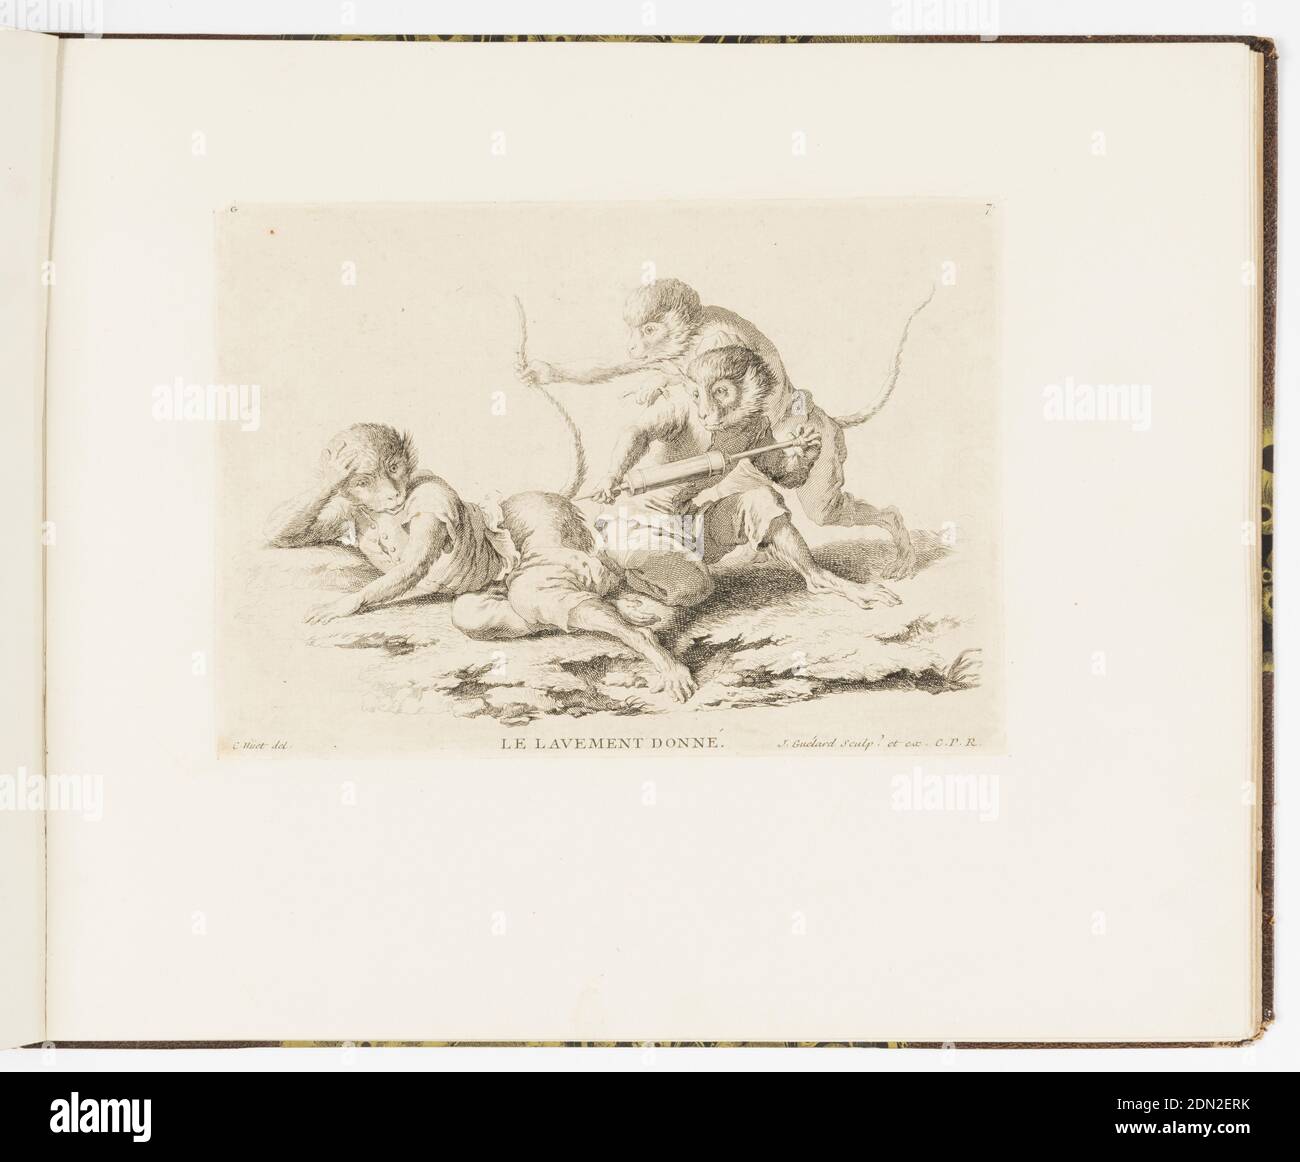 Plate 7, Le Lavement Donné (The Enema Given), Singeries ou différentes actions de la vie humaine représentées par des singes (Monkey Antics or Different Actions of Human Life Represented by Monkeys), Christophe Huet, French, 1700–1759, Jean-Baptiste-Antoine Guelard, French, 1719–ca. 1755, Charpentier, Paris, France, Etching on paper, Plate 7 of a series of 23 prints featuring monkeys acting as humans in various figural scenes. In outdoor setting, a group of three monkey figures dressed in human costume. The monkey at left reclines with its rear end exposed. He holds his hand at his head Stock Photo